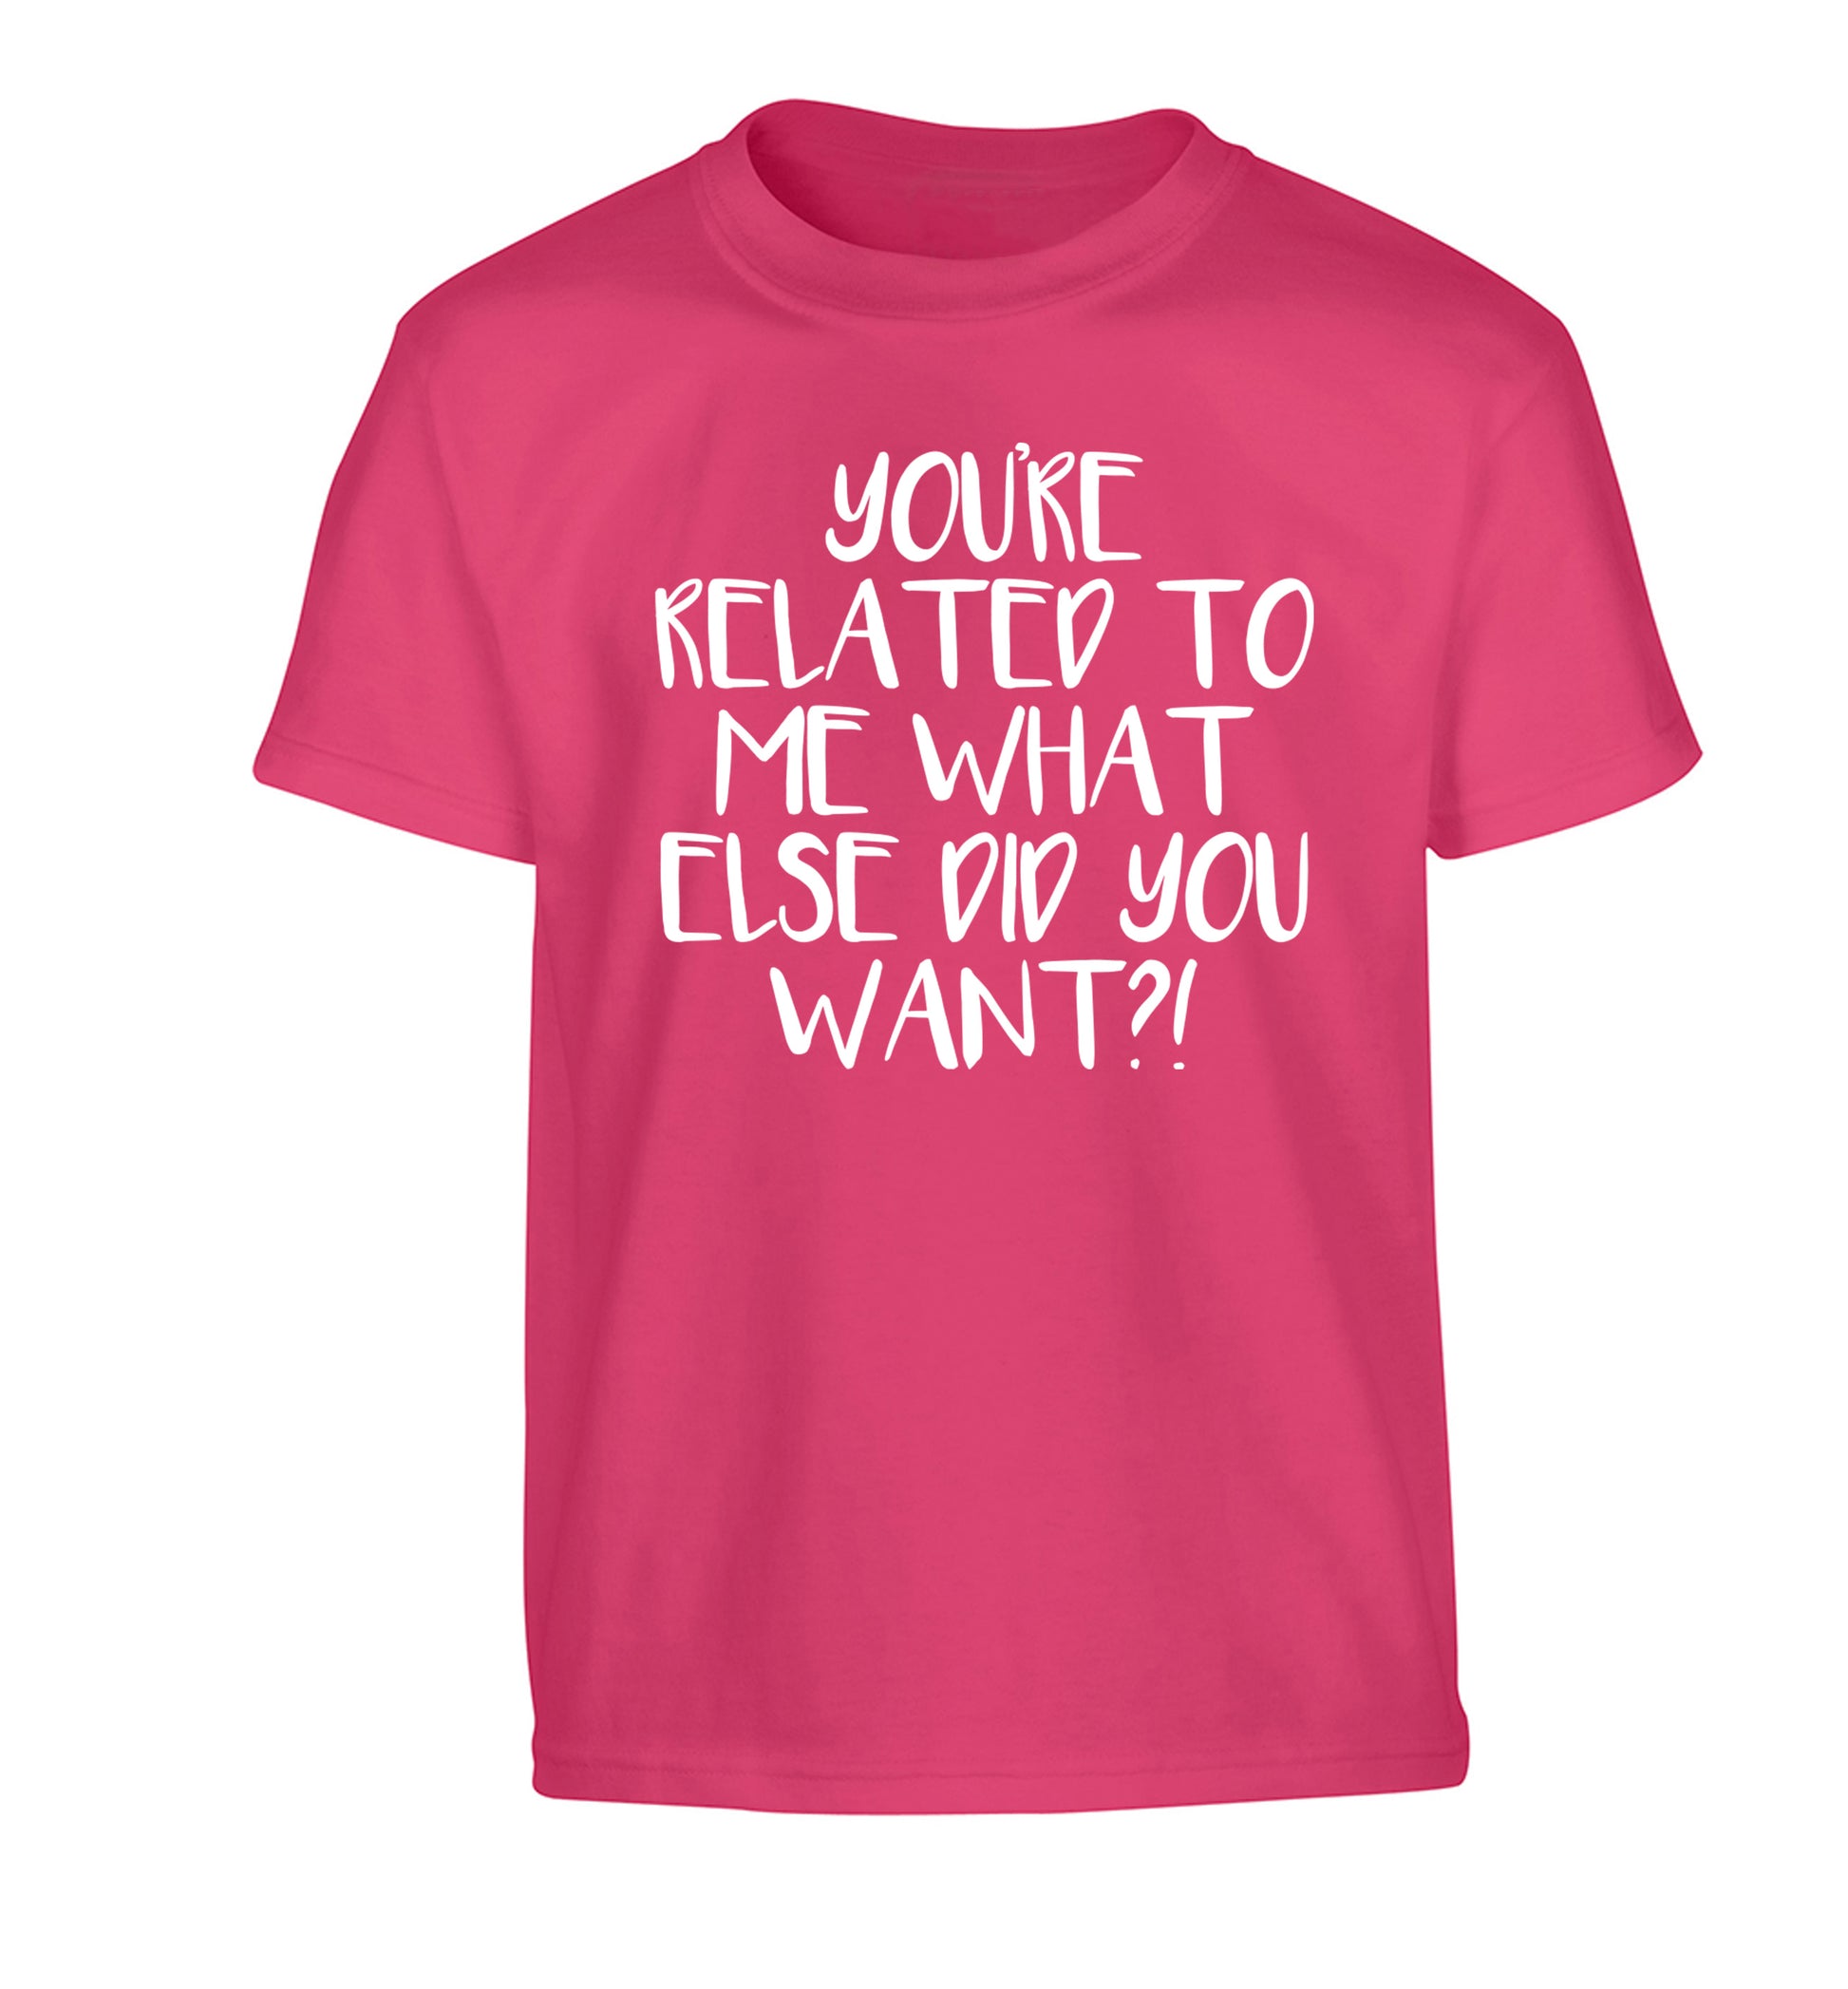 You're related to me what more do you want? Children's pink Tshirt 12-13 Years